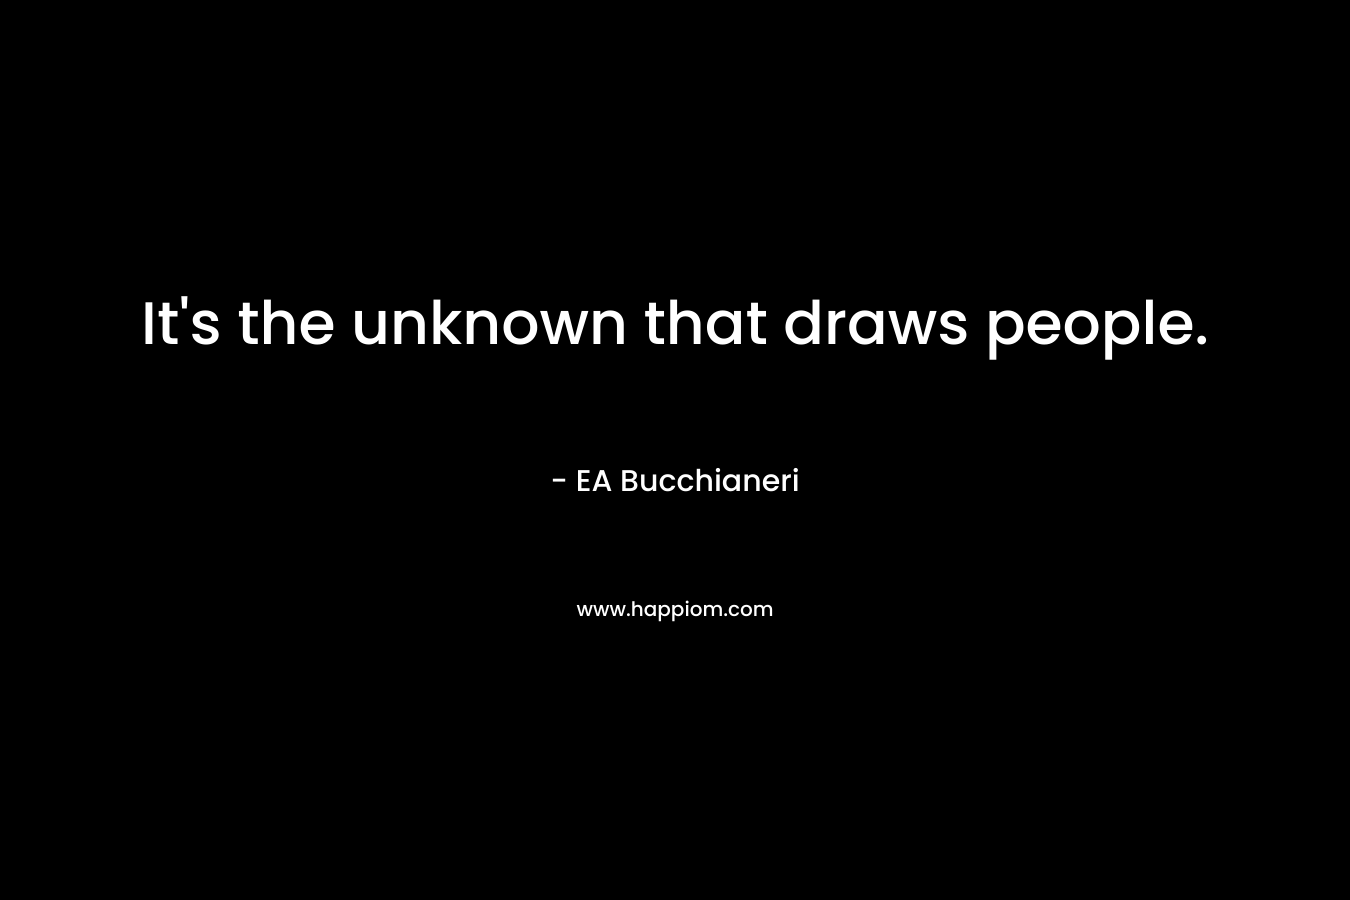 It's the unknown that draws people.